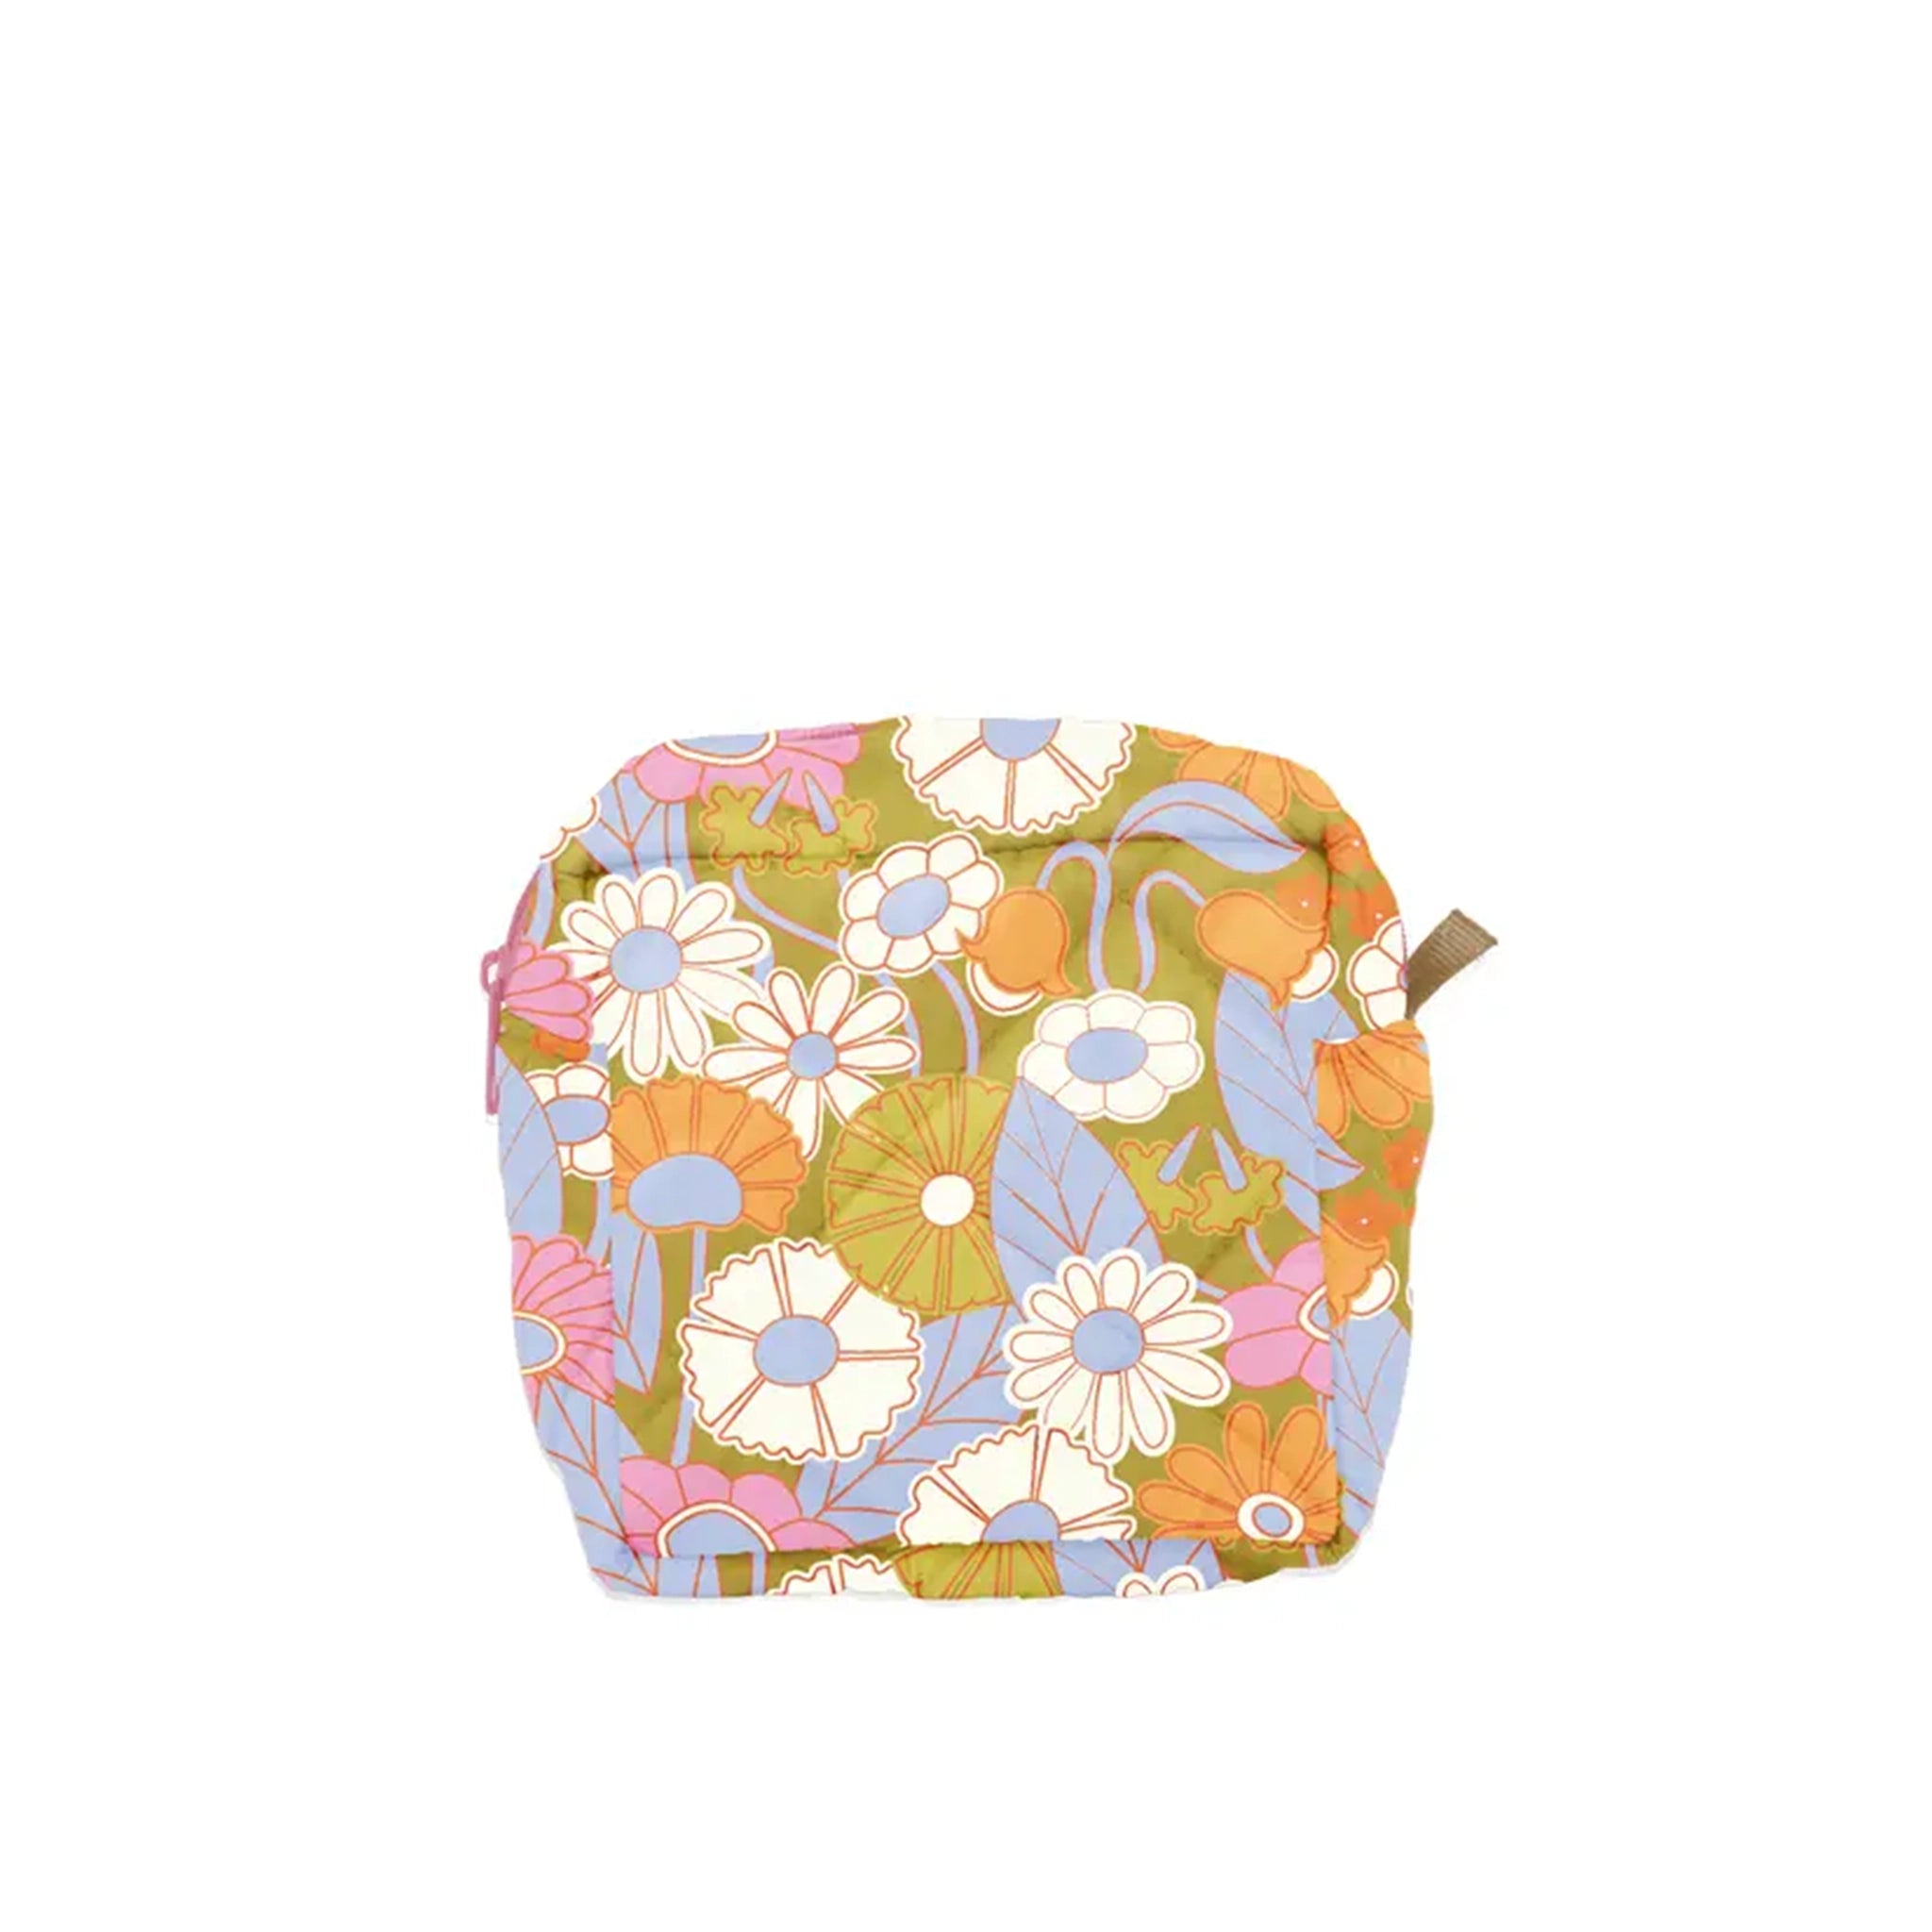 A quilted puffy pouch in a multi-colored floral design with a zipper closure.